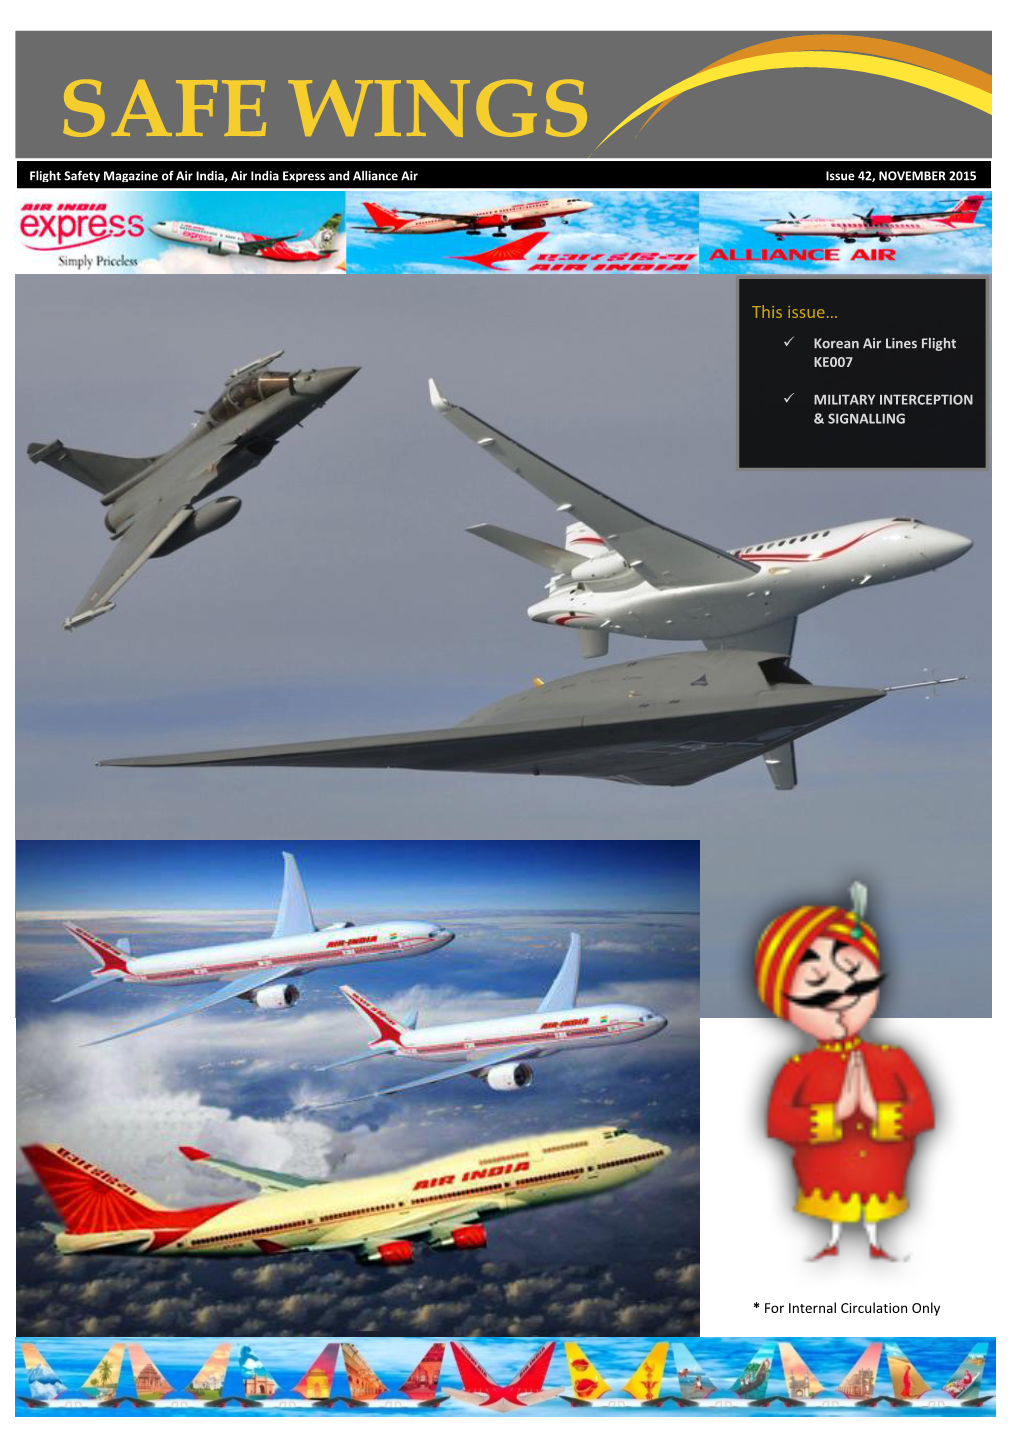 SAFE WINGS Flight Safety Magazine of Air India, Air India Express and Alliance Air Issue 42, NOVEMBER 2015